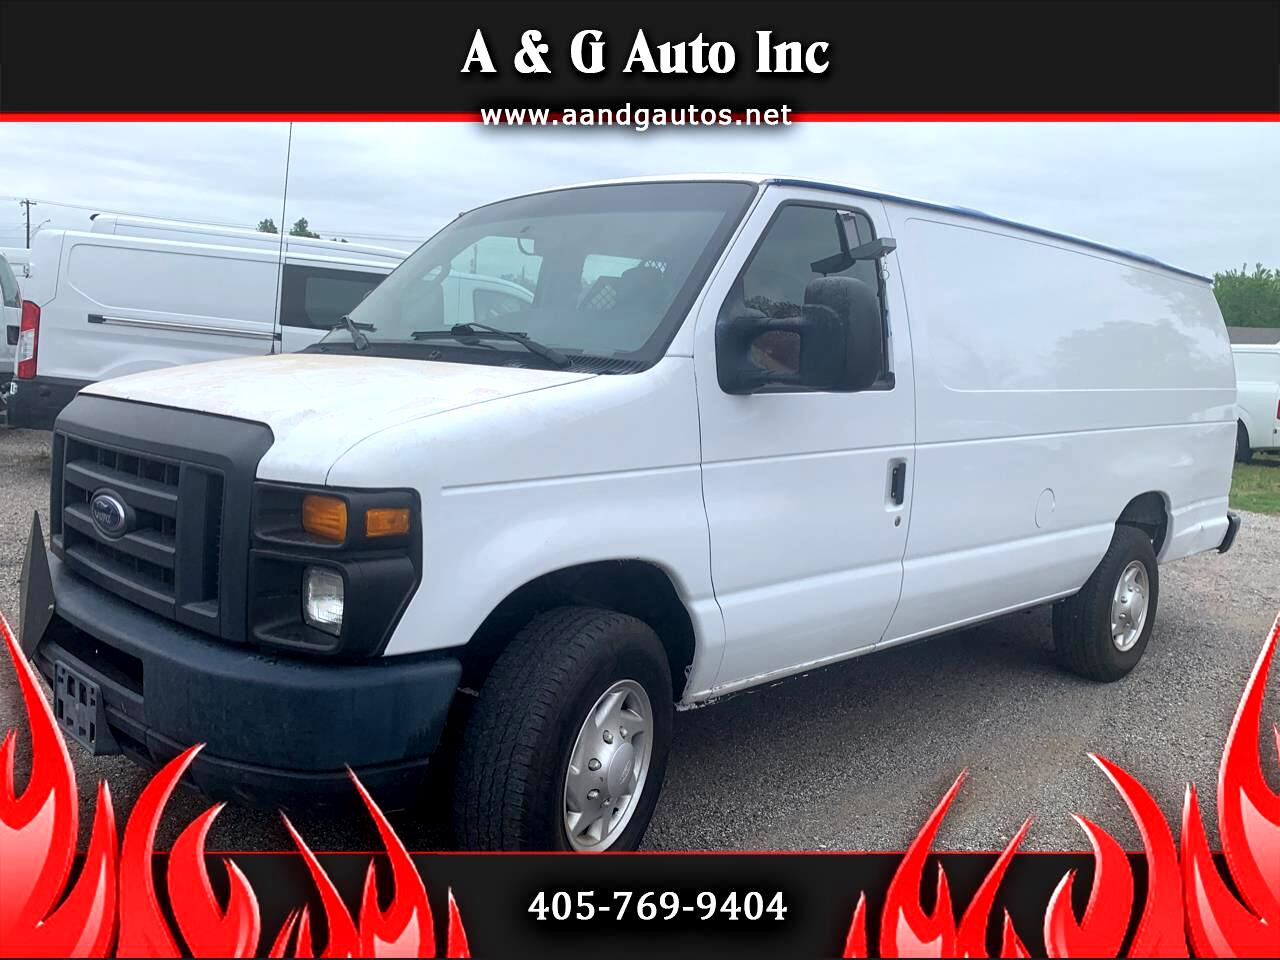 2013 Ford Econoline for sale in Oklahoma City OK 73141 by A & G Auto Inc